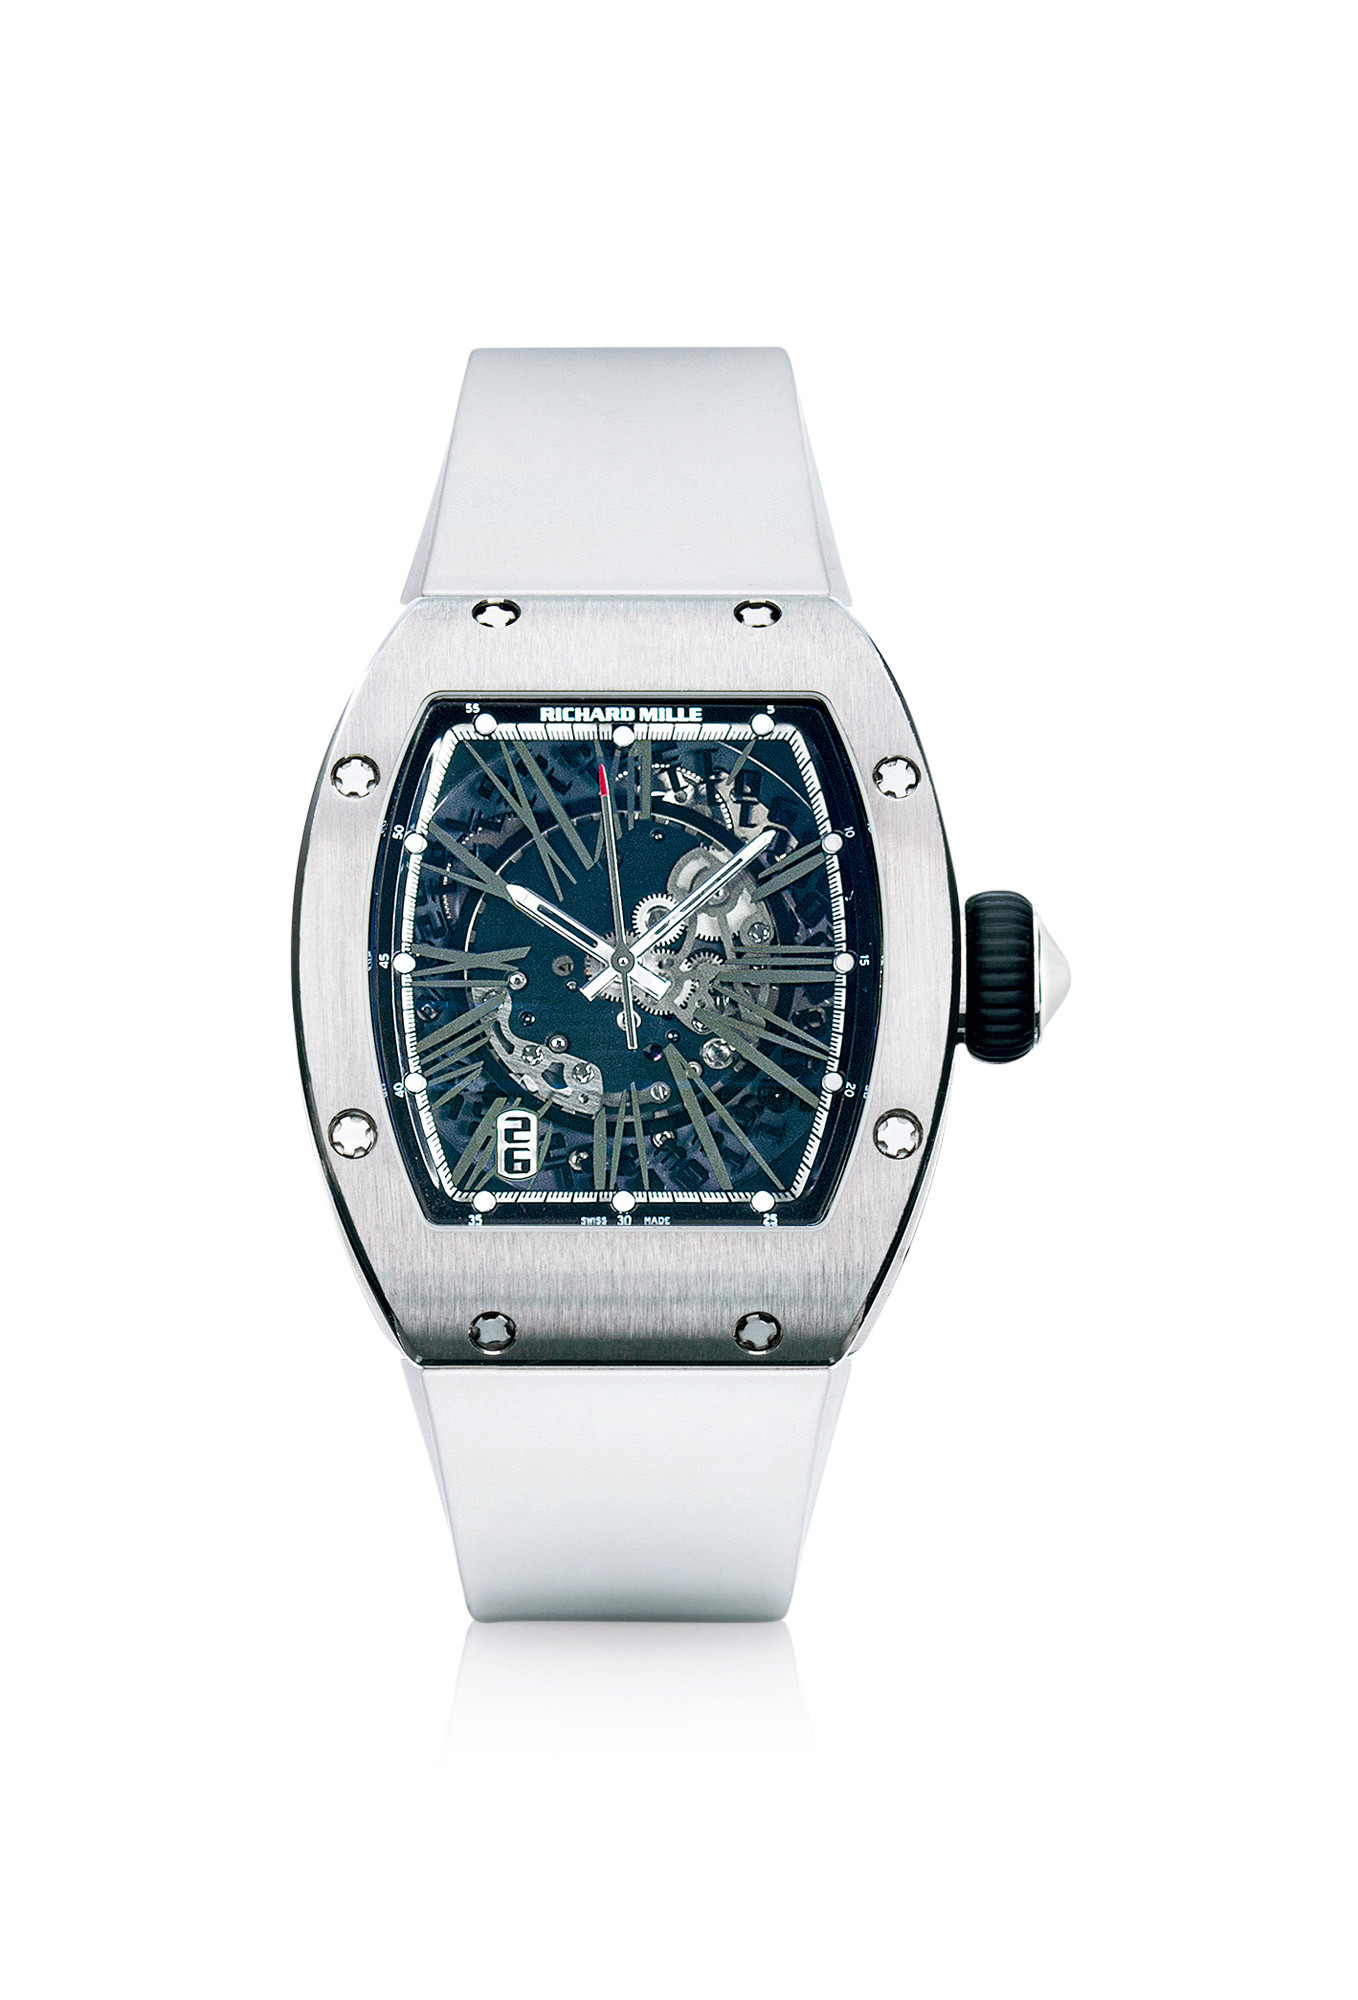 RICHARD MILLE A VERY FINE WHITE GOLD TONNEAU-SHAPED AUTOMATIC WRISTWATCH，WITH DATE，ACCOMPANIED WITH CERTICATE OF ORIGIN，INSTRUCTION PAPER AND PRESENTATION BOX